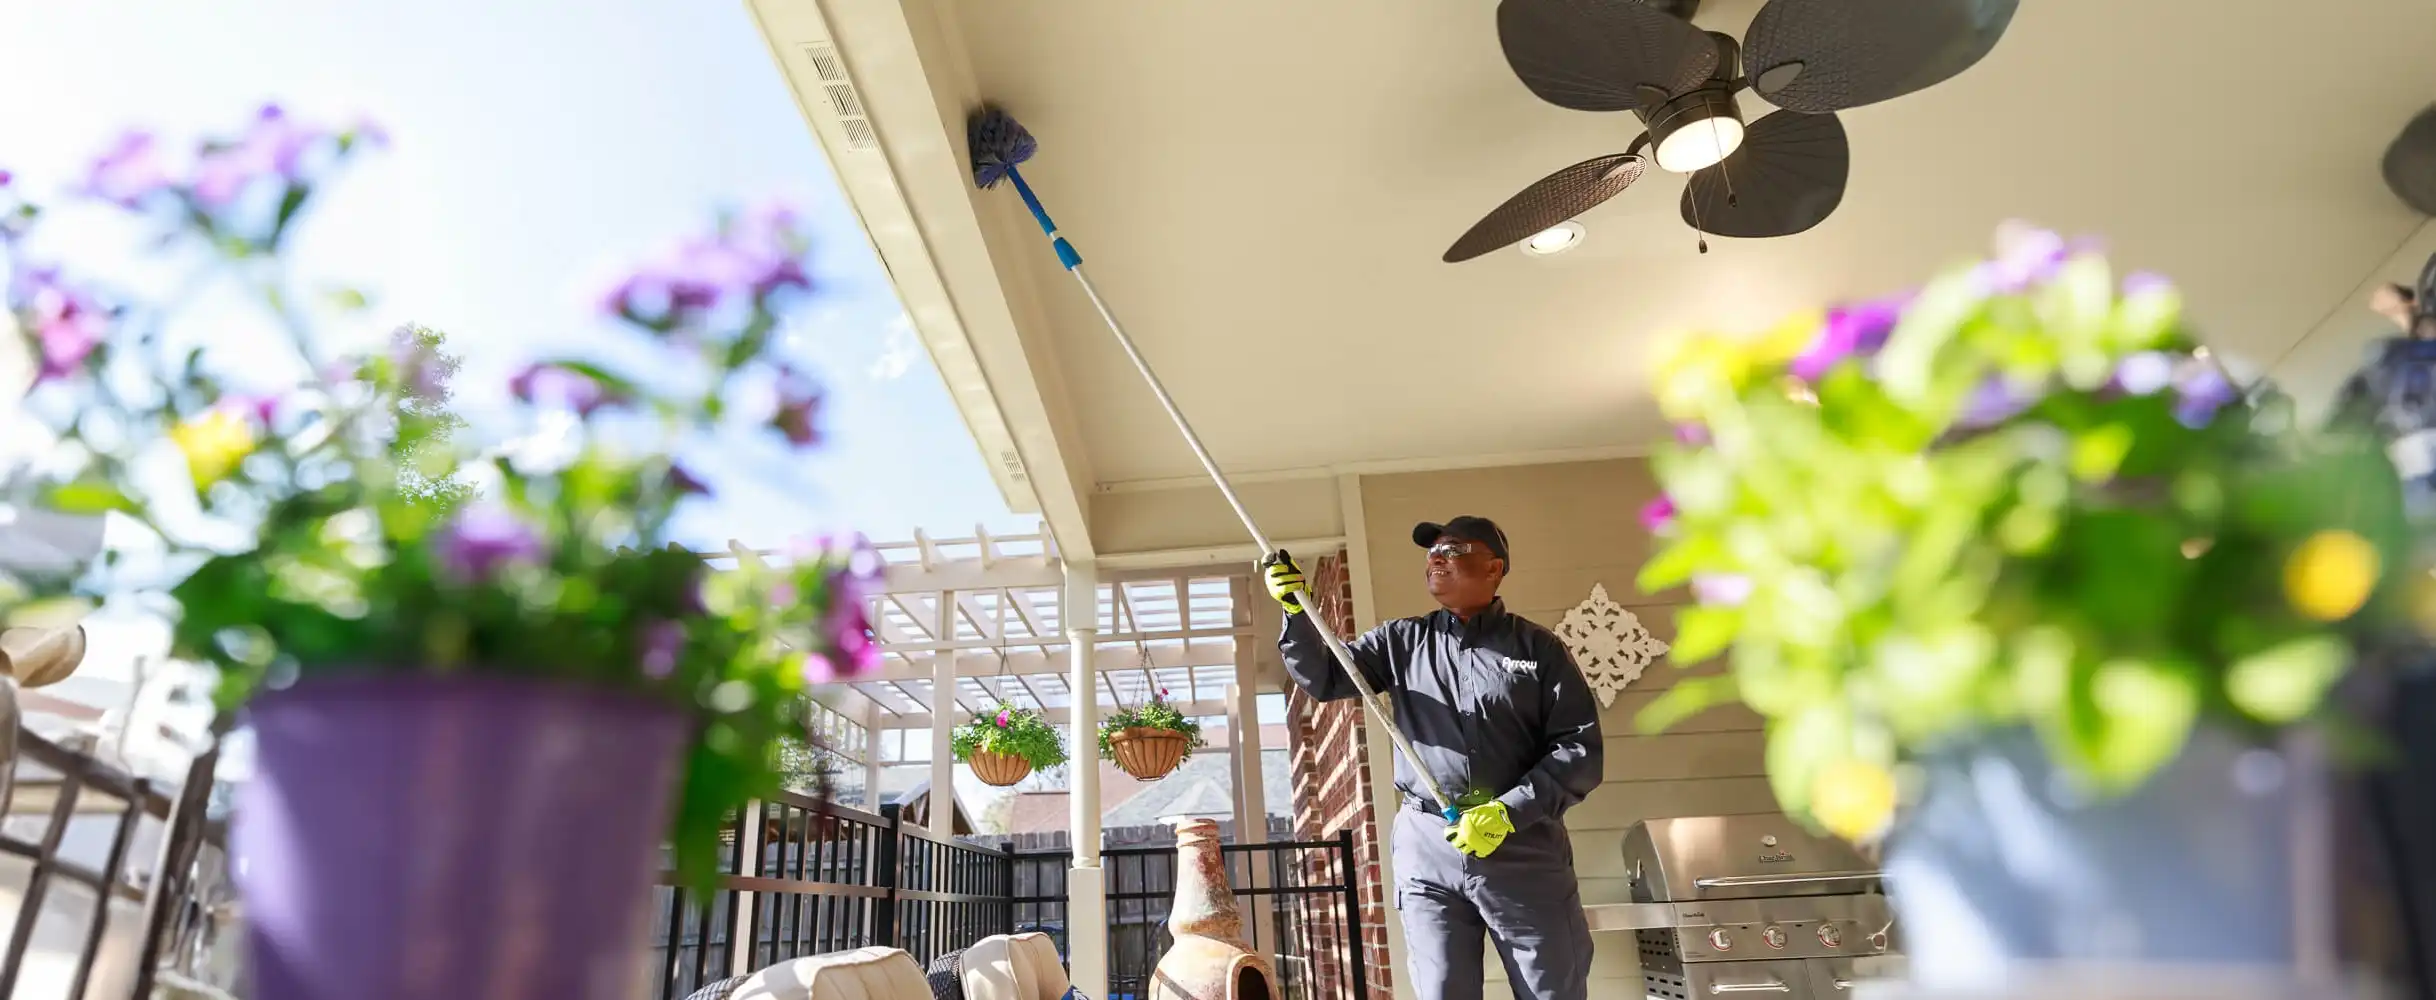 Pest control technician treating a patio - Keep pests away from your home with Arrow Services in FL